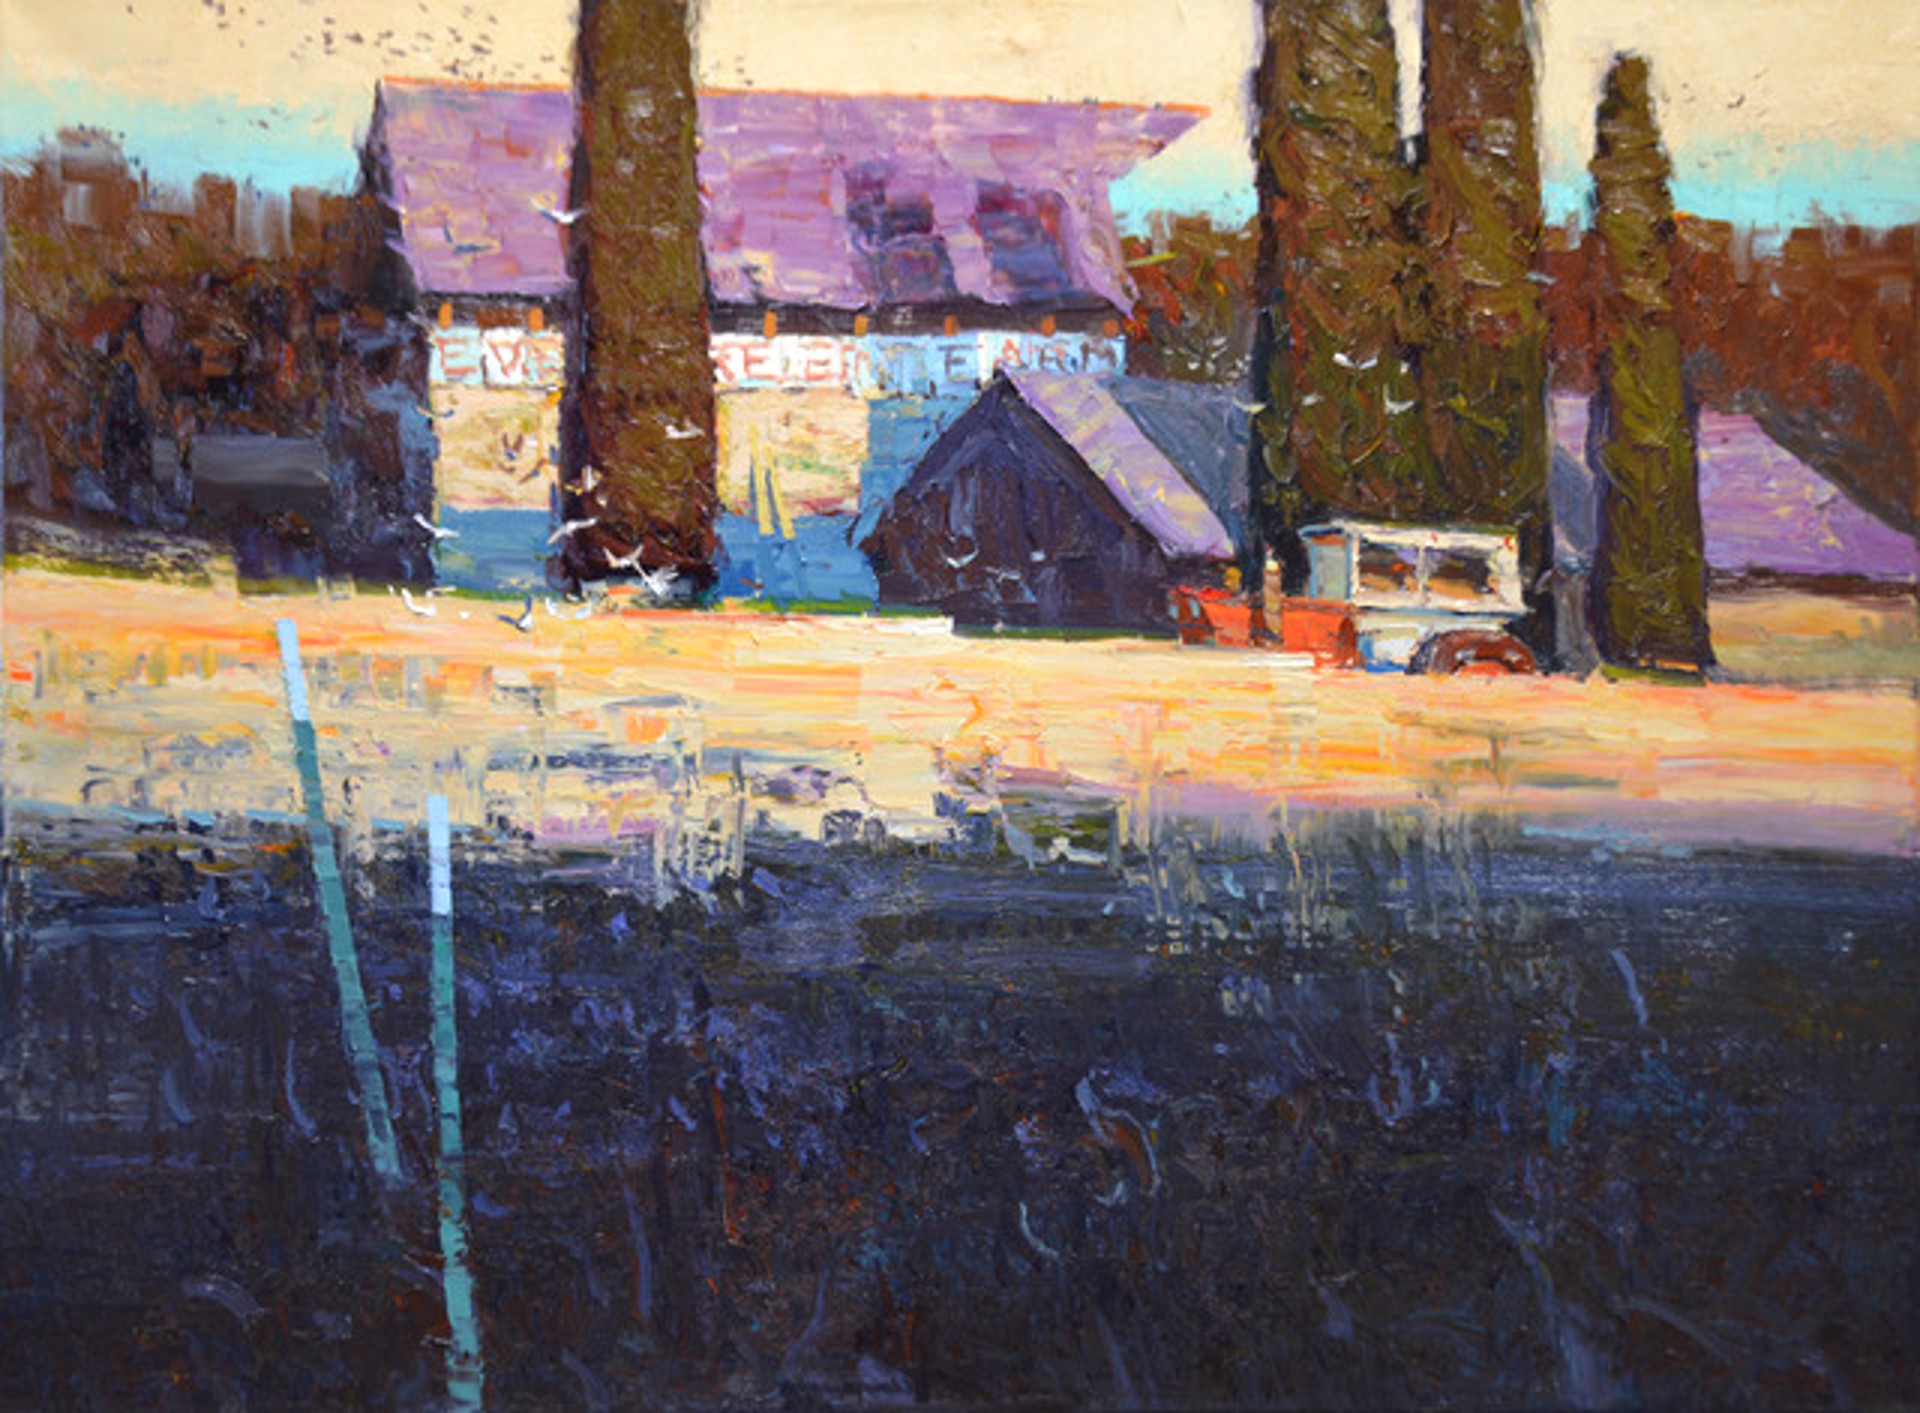 A Palette Knife Oil Painting Of A Barn With A Tractor In Front And A flock Of Birds By Silas Thompson At Gallery Wild